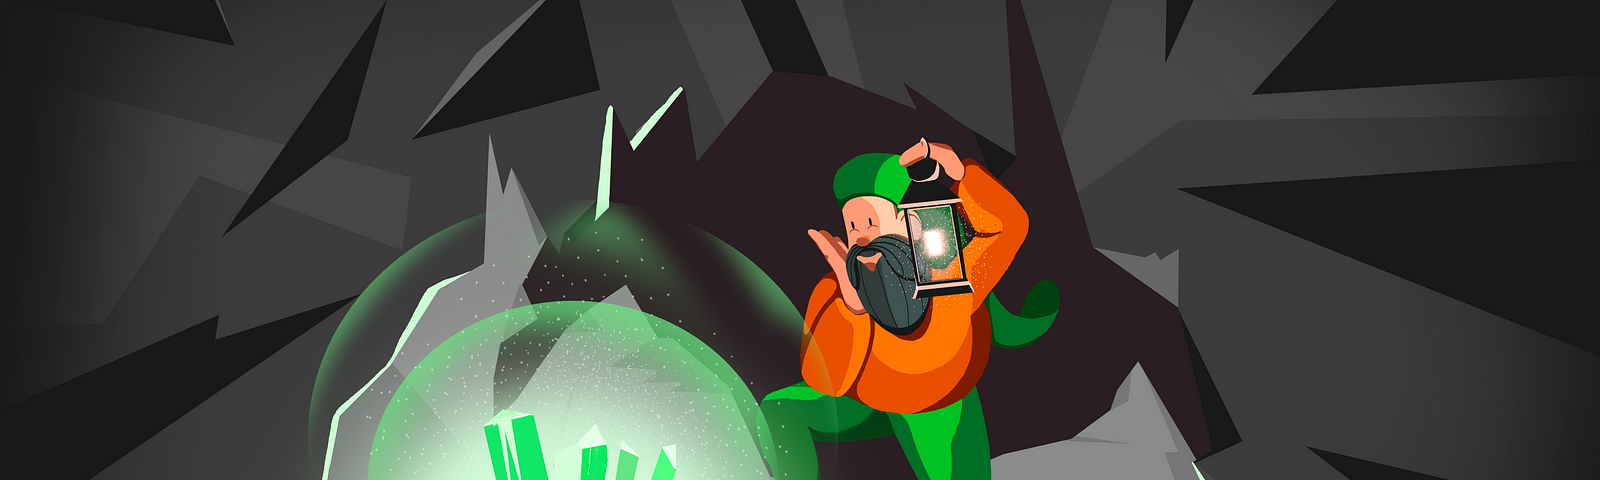 A green-capped dwarf finds a treasure in a dark gray cave. The lantern in his hand illuminates the green crystal.